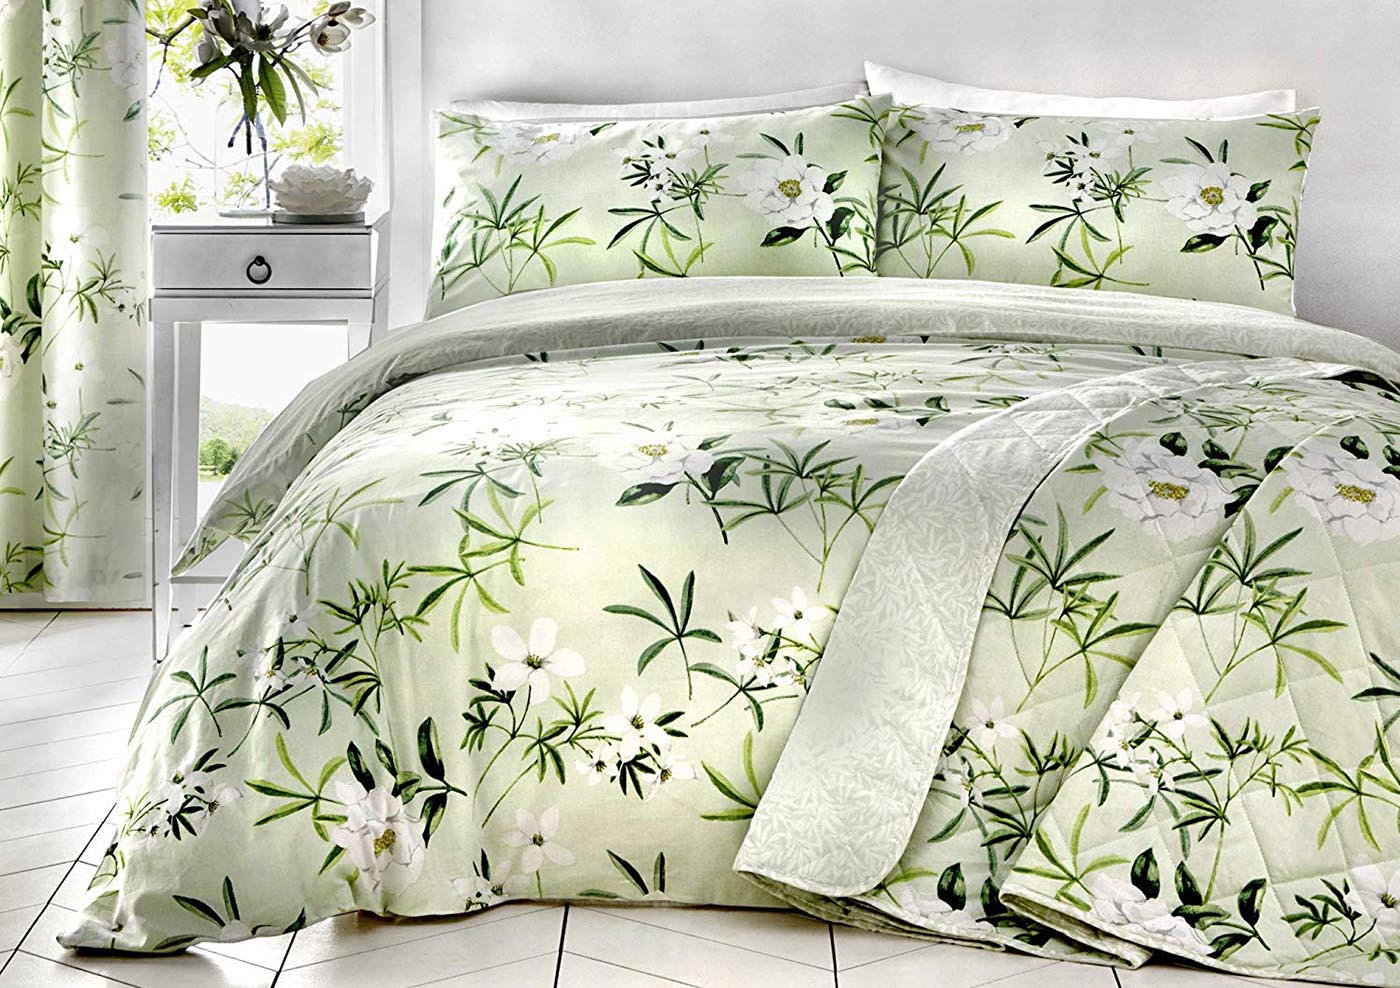 Luxury Bedding Towels Linens And Home Products Musbury Fabrics